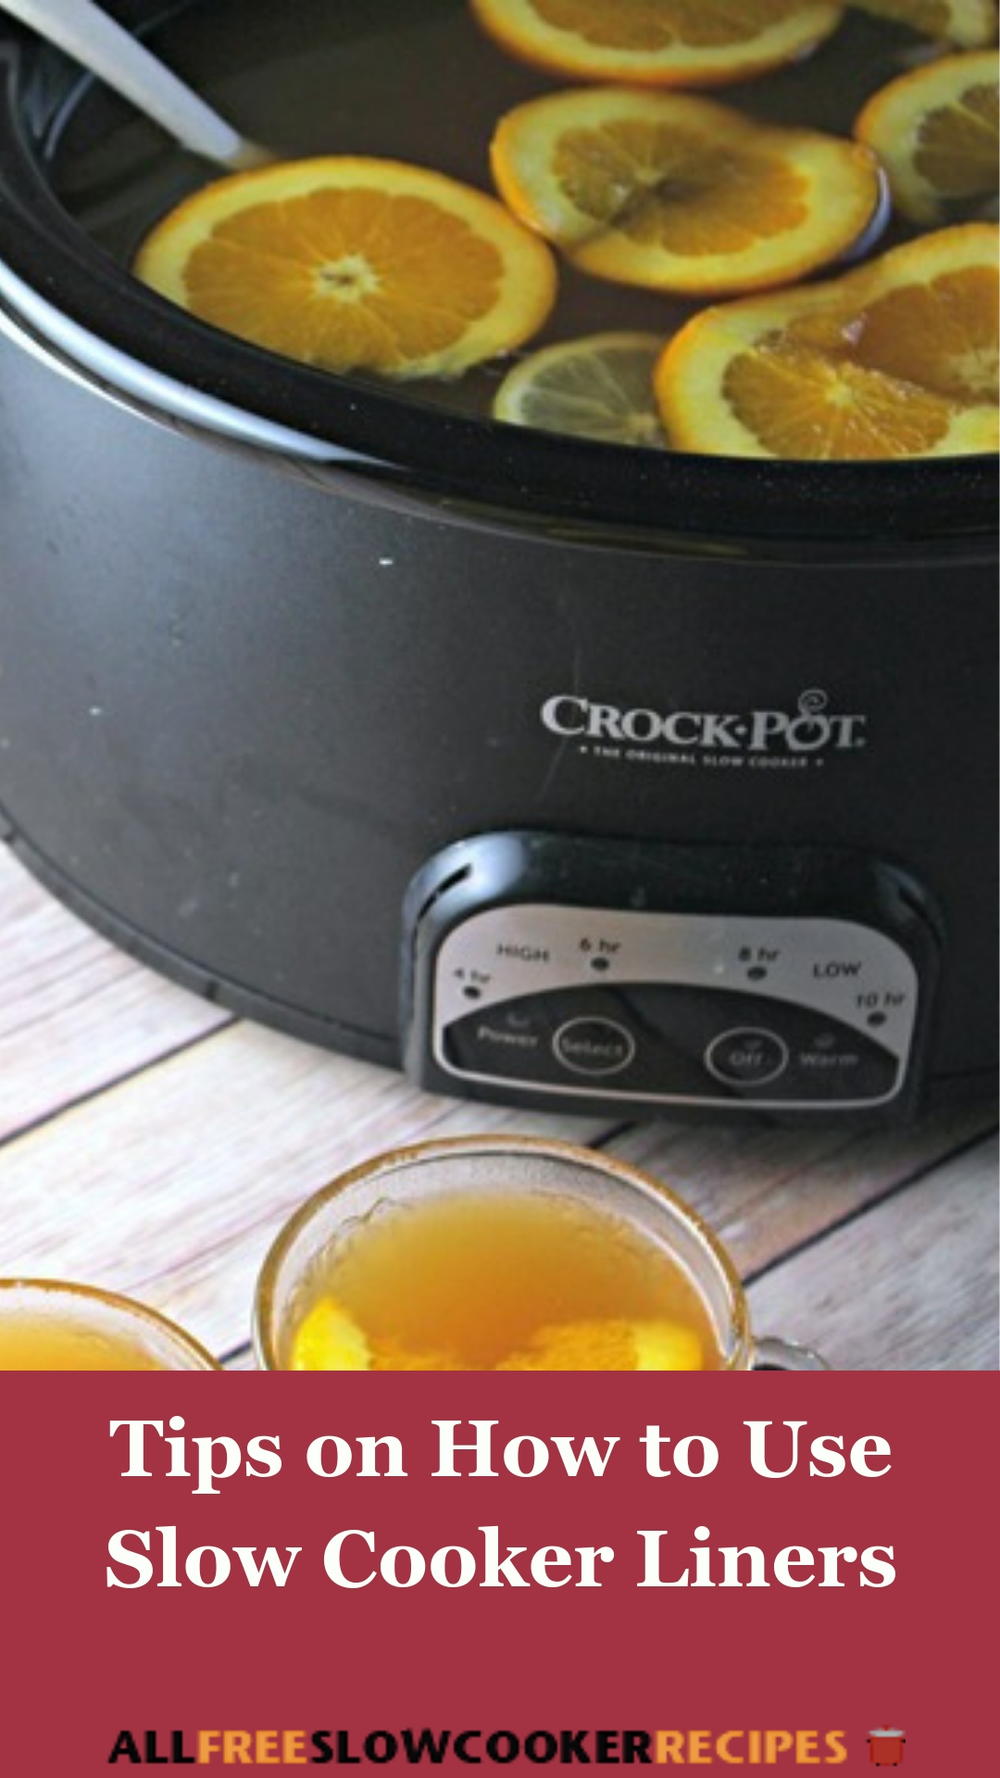 Slow Cooker Liners - CooksInfo